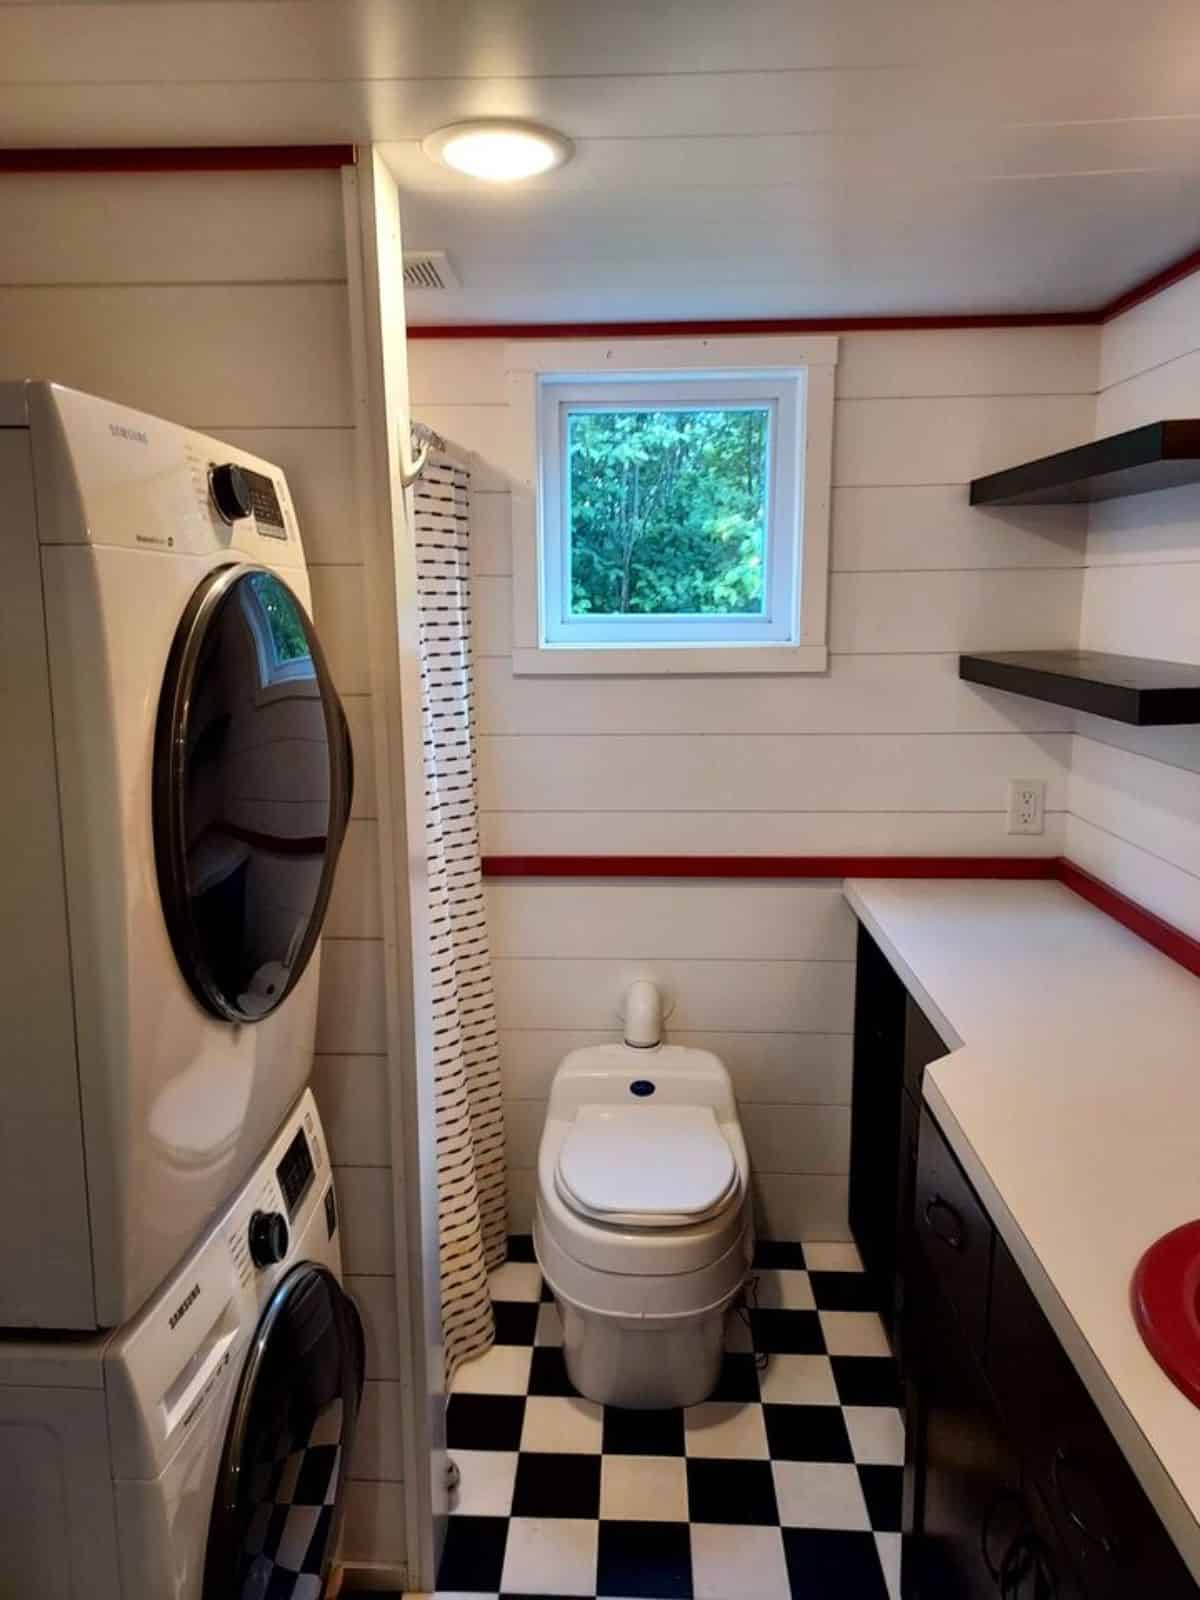 bathroom of tiny home in Minnesota has all the standard fittings with shelves